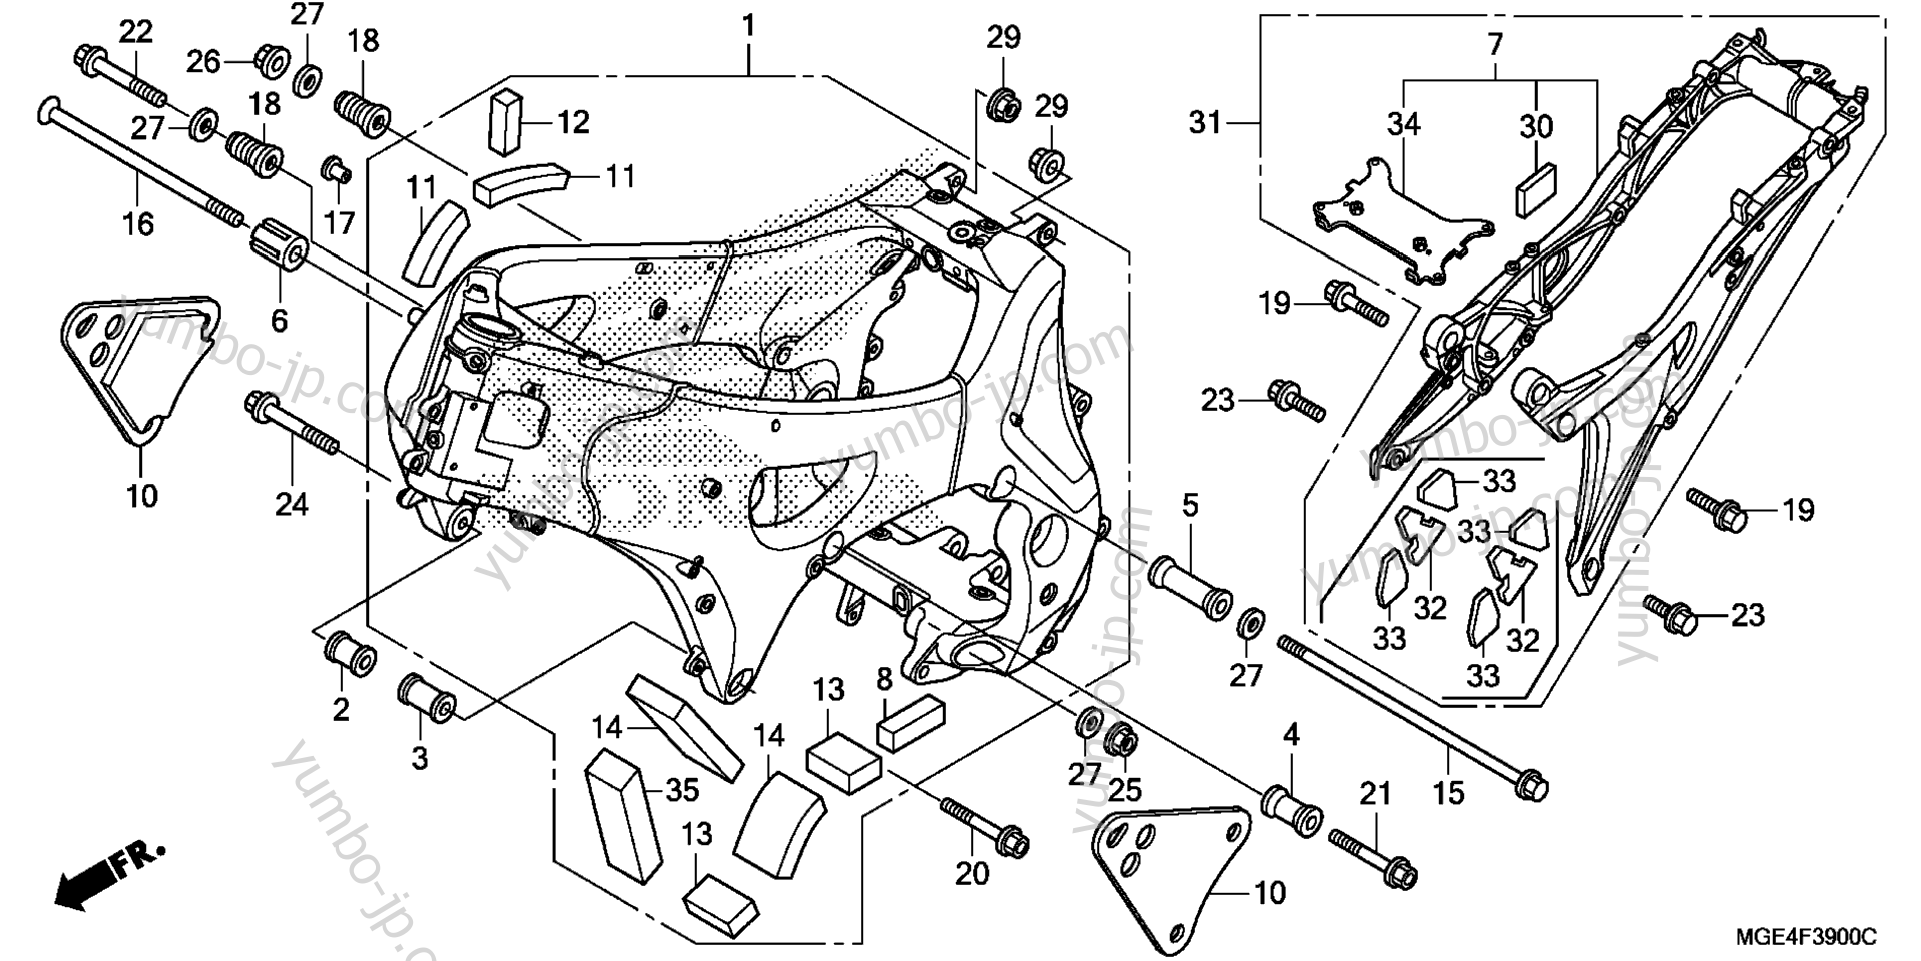 FRAME for motorcycles HONDA VFR1200F AC 2013 year